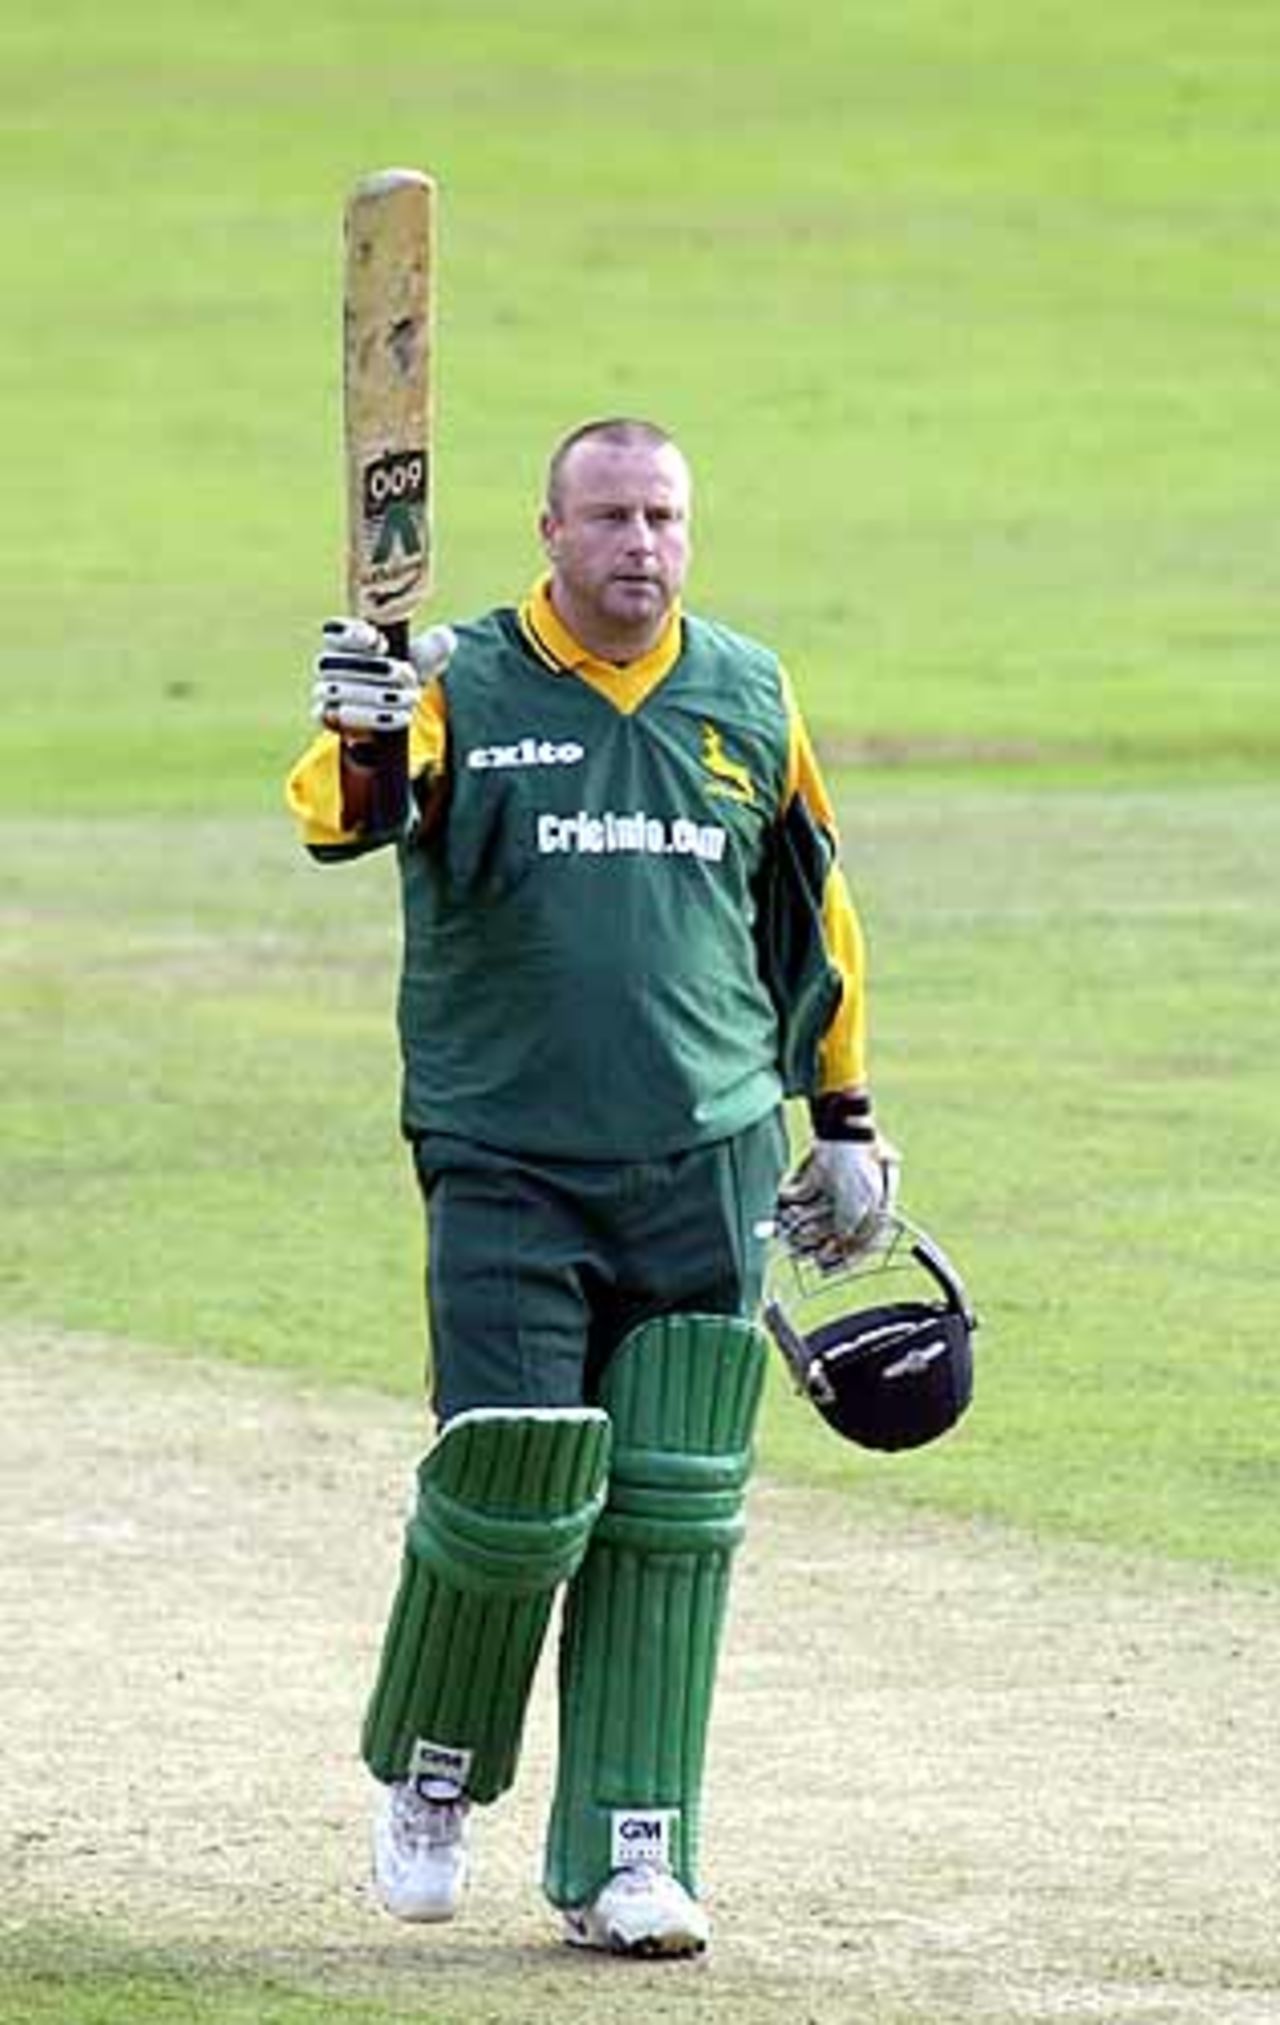 John Morris, with his final 50 at this level of cricket at Trent Bridge16th September 2001